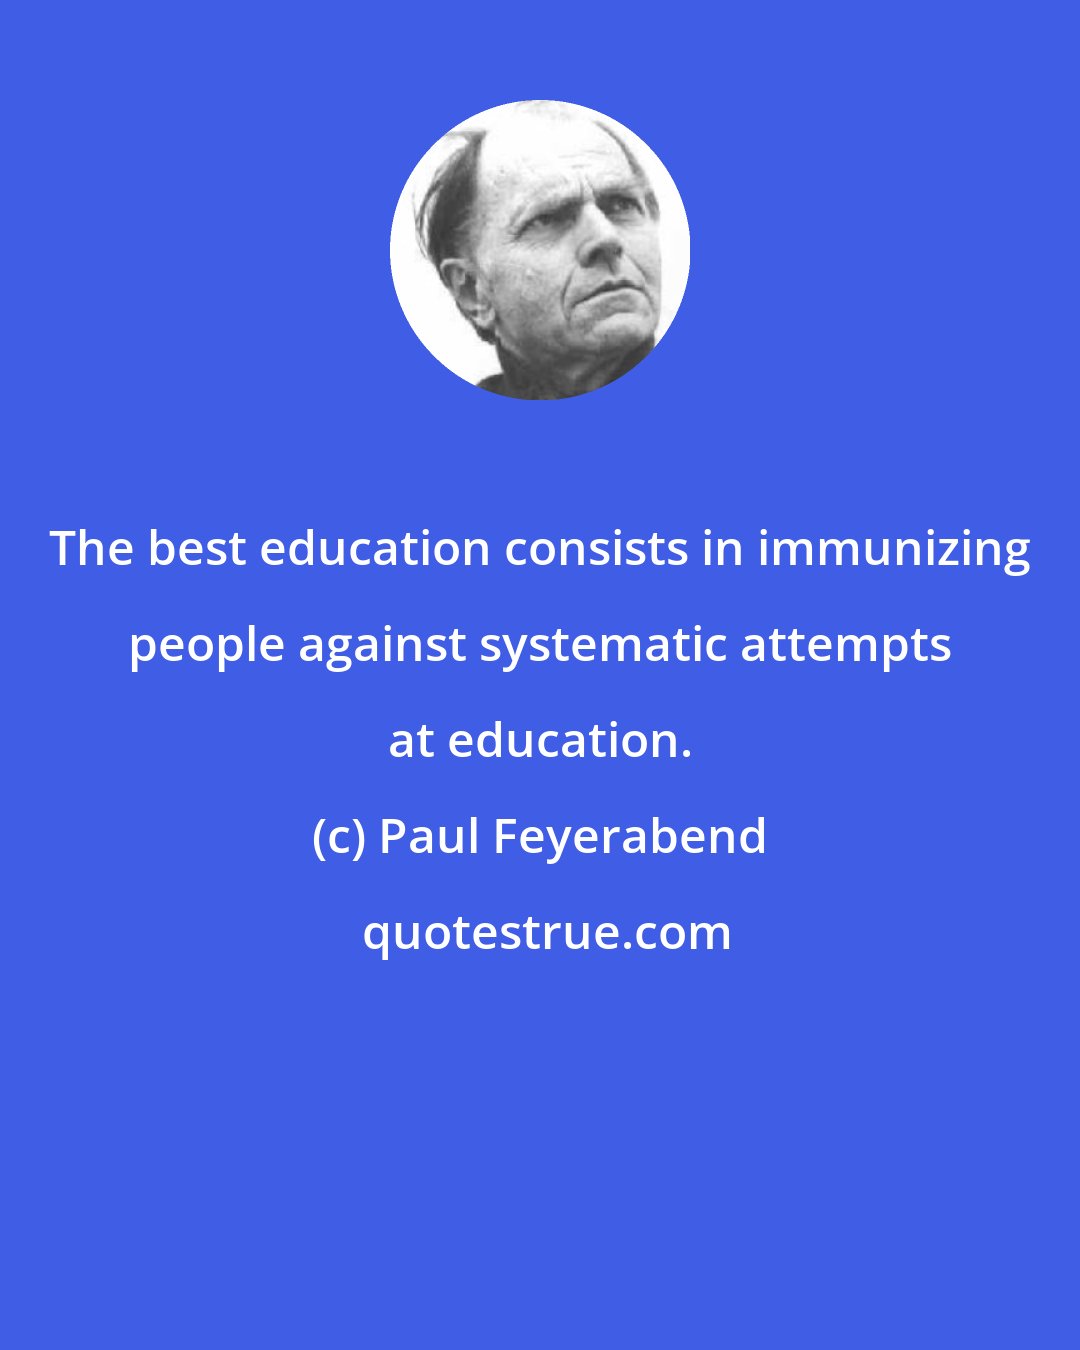 Paul Feyerabend: The best education consists in immunizing people against systematic attempts at education.